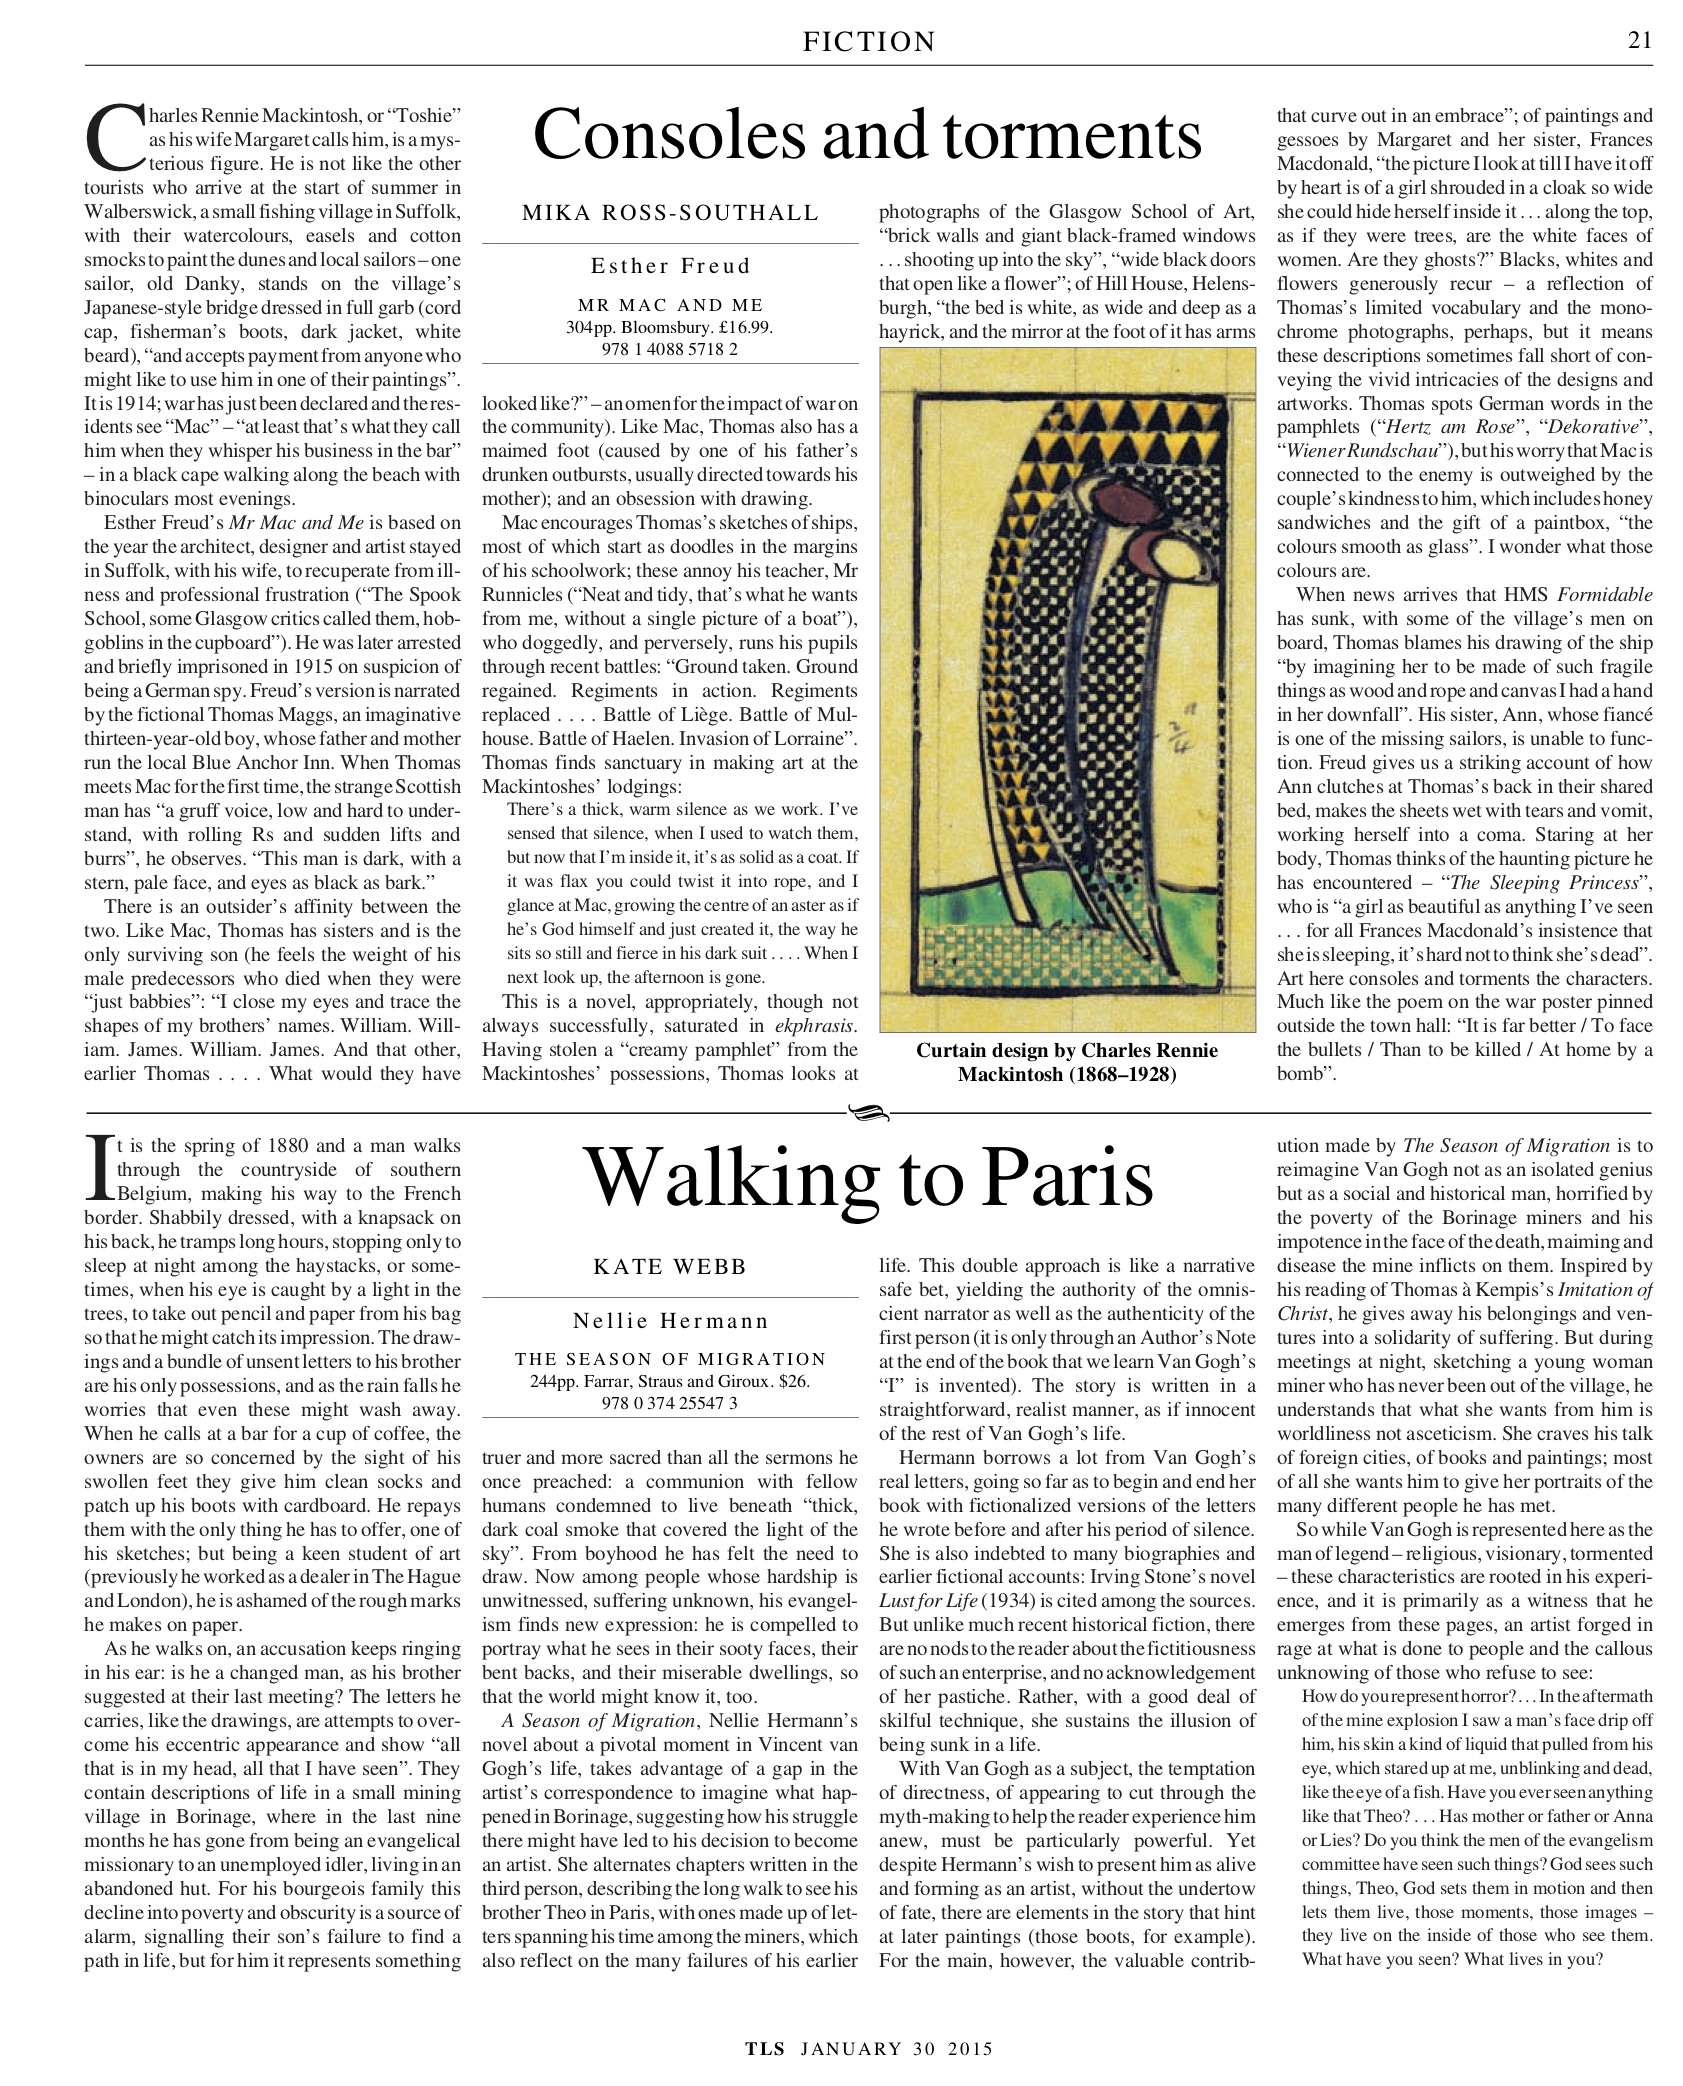 The Times Literary Supplement, 30 January 2015. "Consoles and torments, Esther Freud"